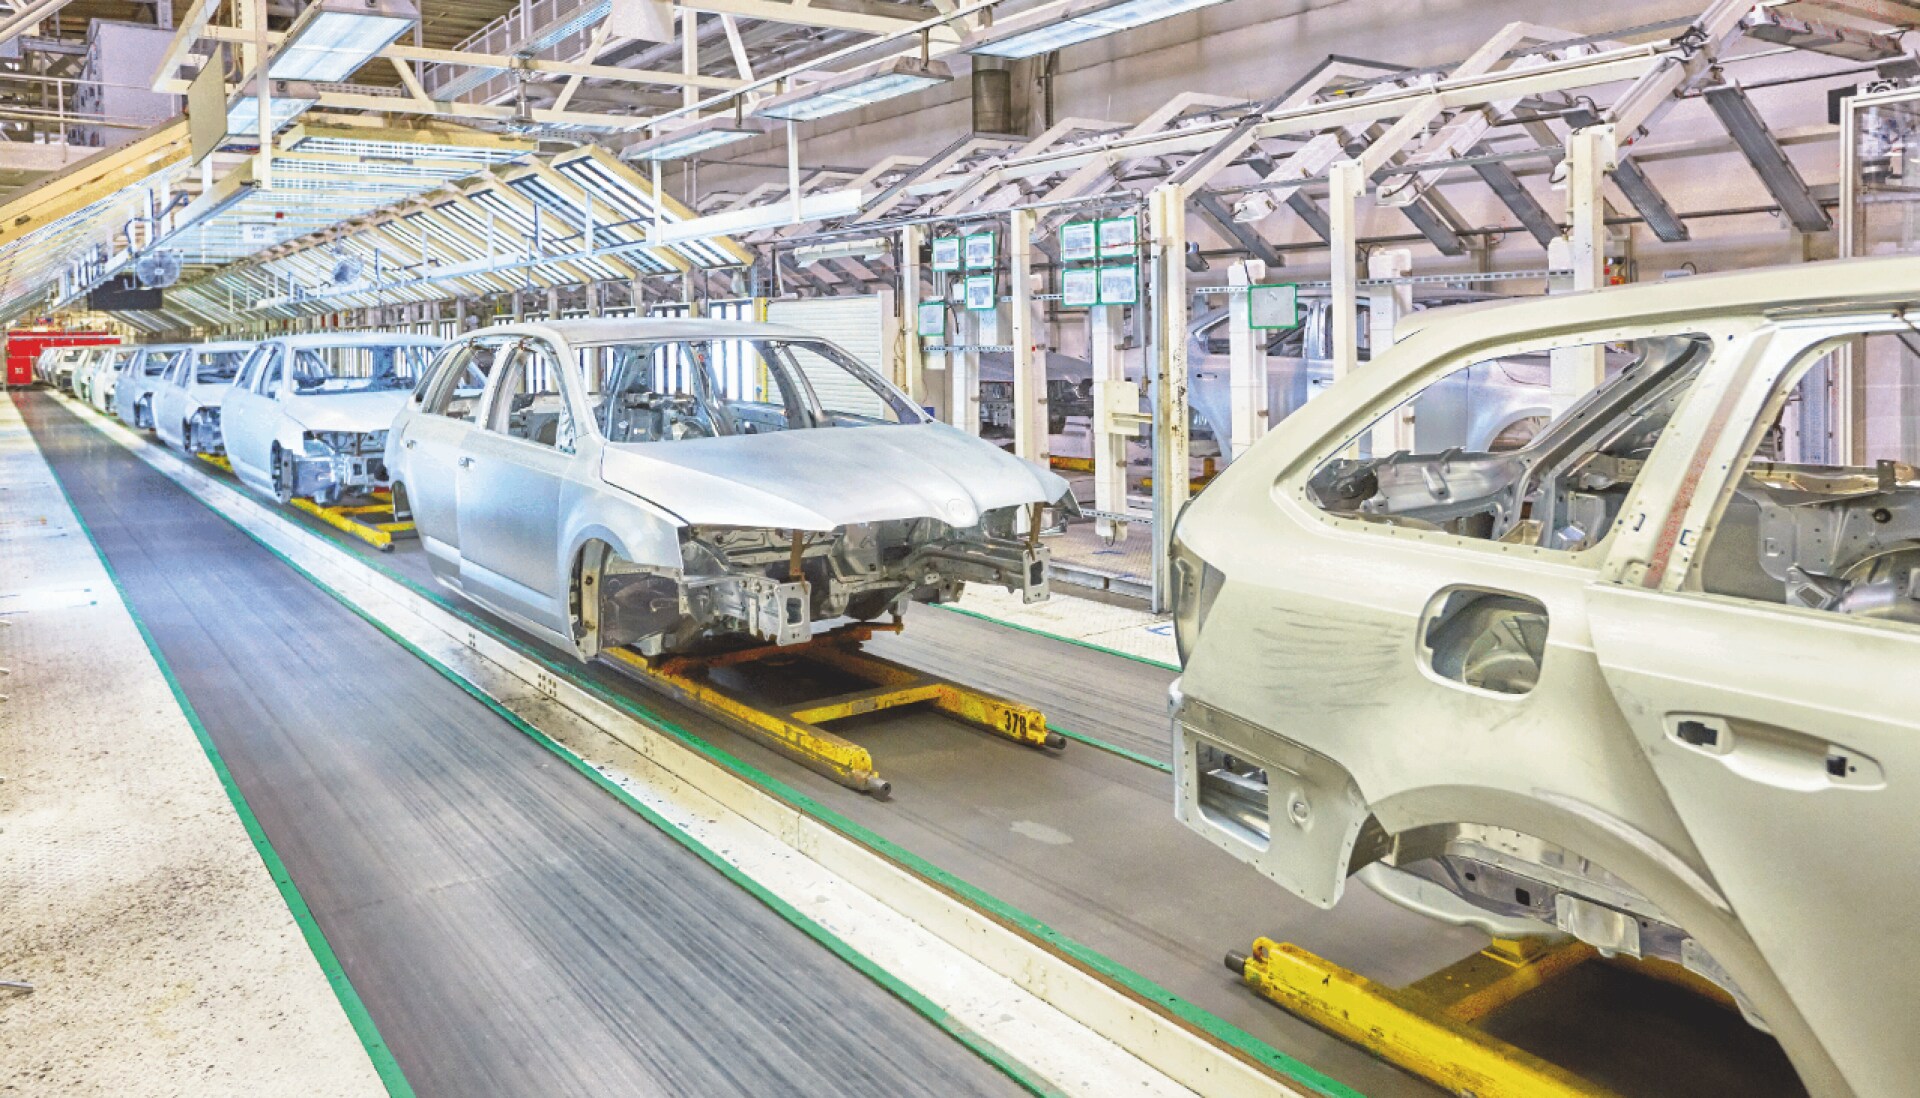 A production line of car chassis in an automotive plant